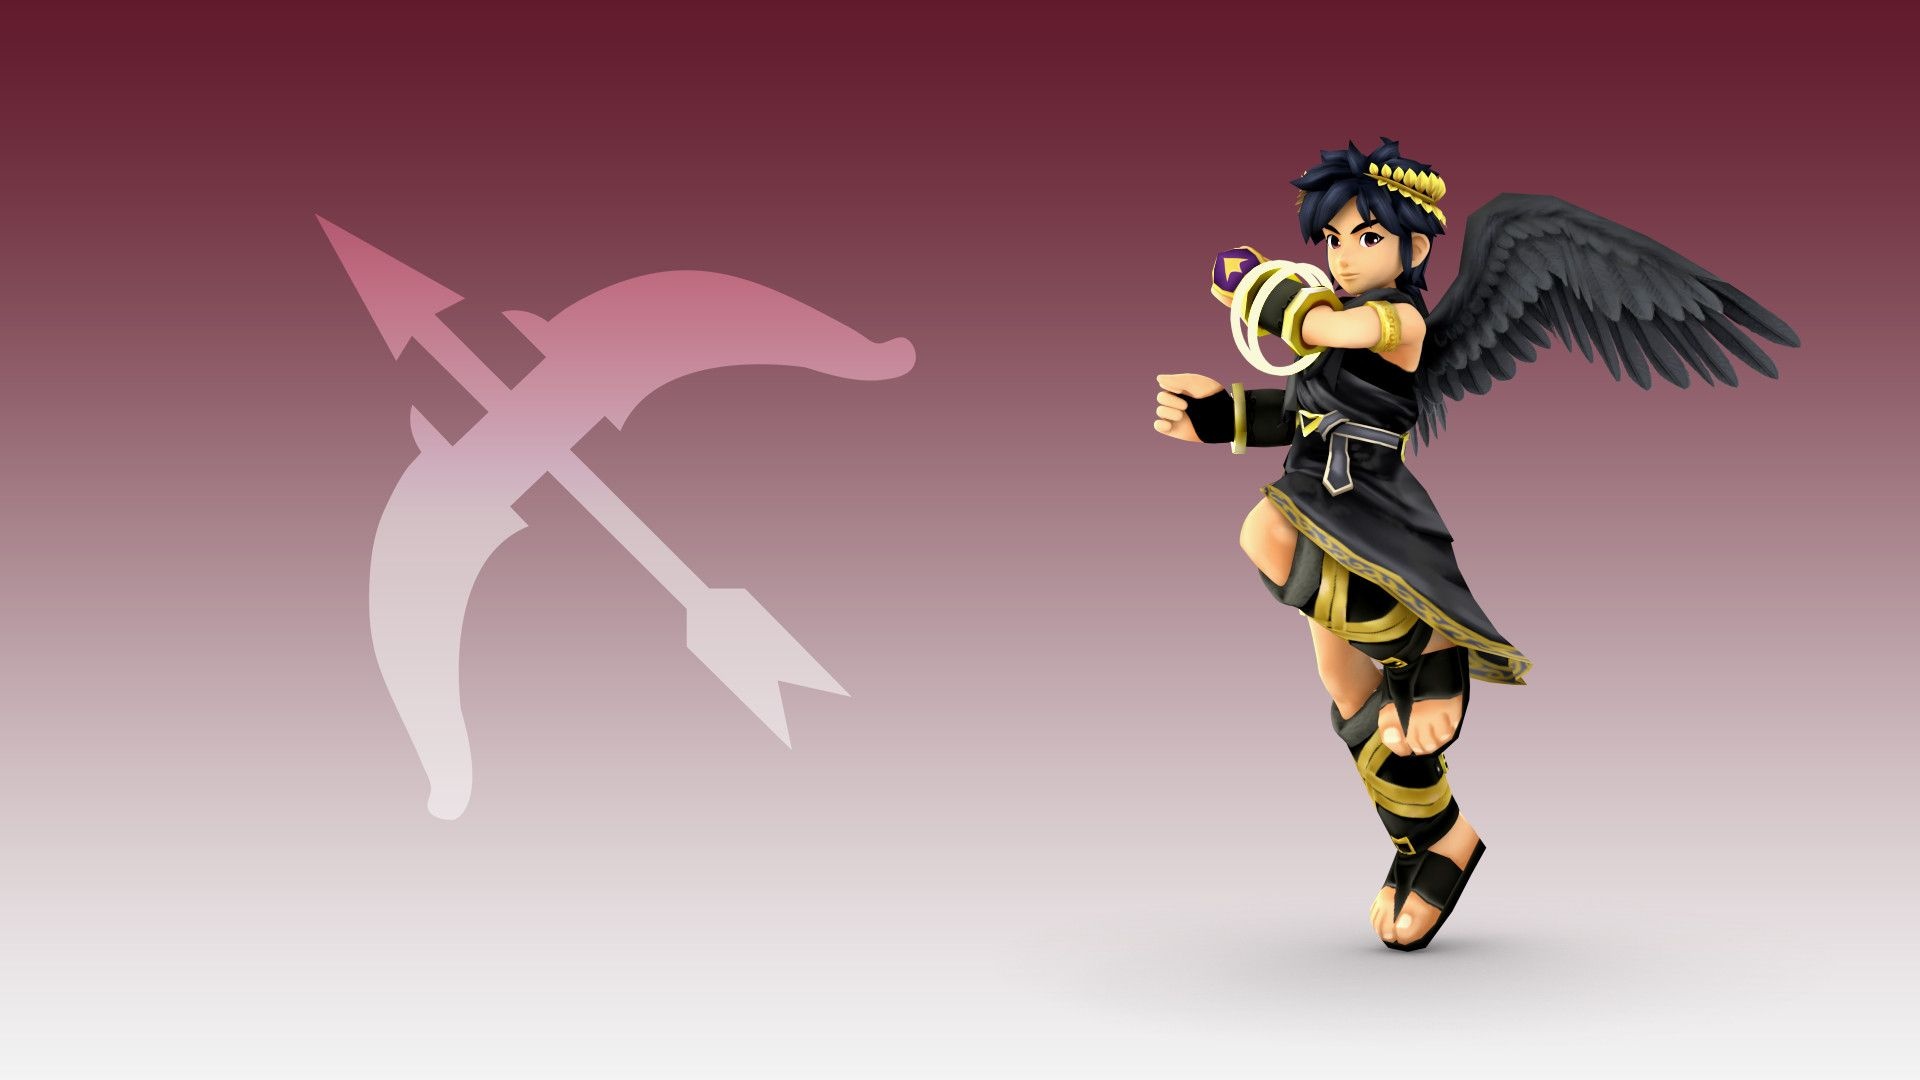 Dark Pit wallpapers, Antagonistic rival, Shadowy counterpart, Fierce competition, 1920x1080 Full HD Desktop